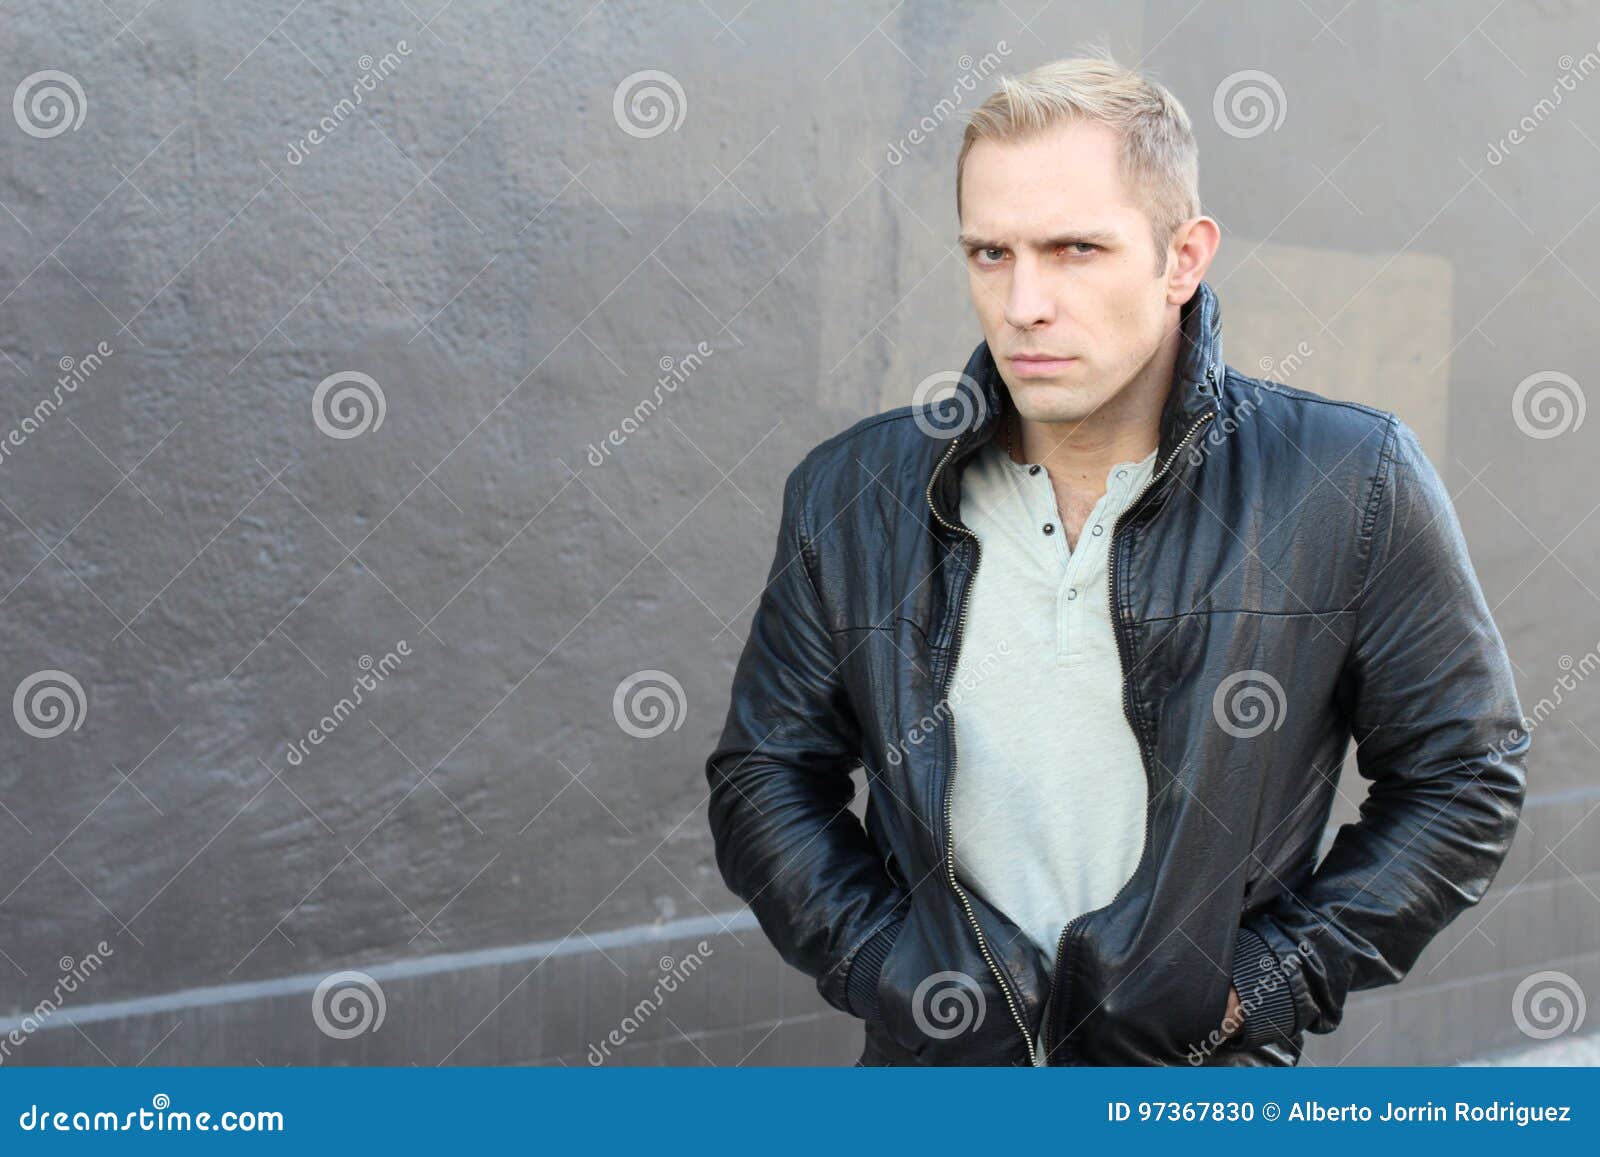 suspicious blond man with an expression of fear and mistrust